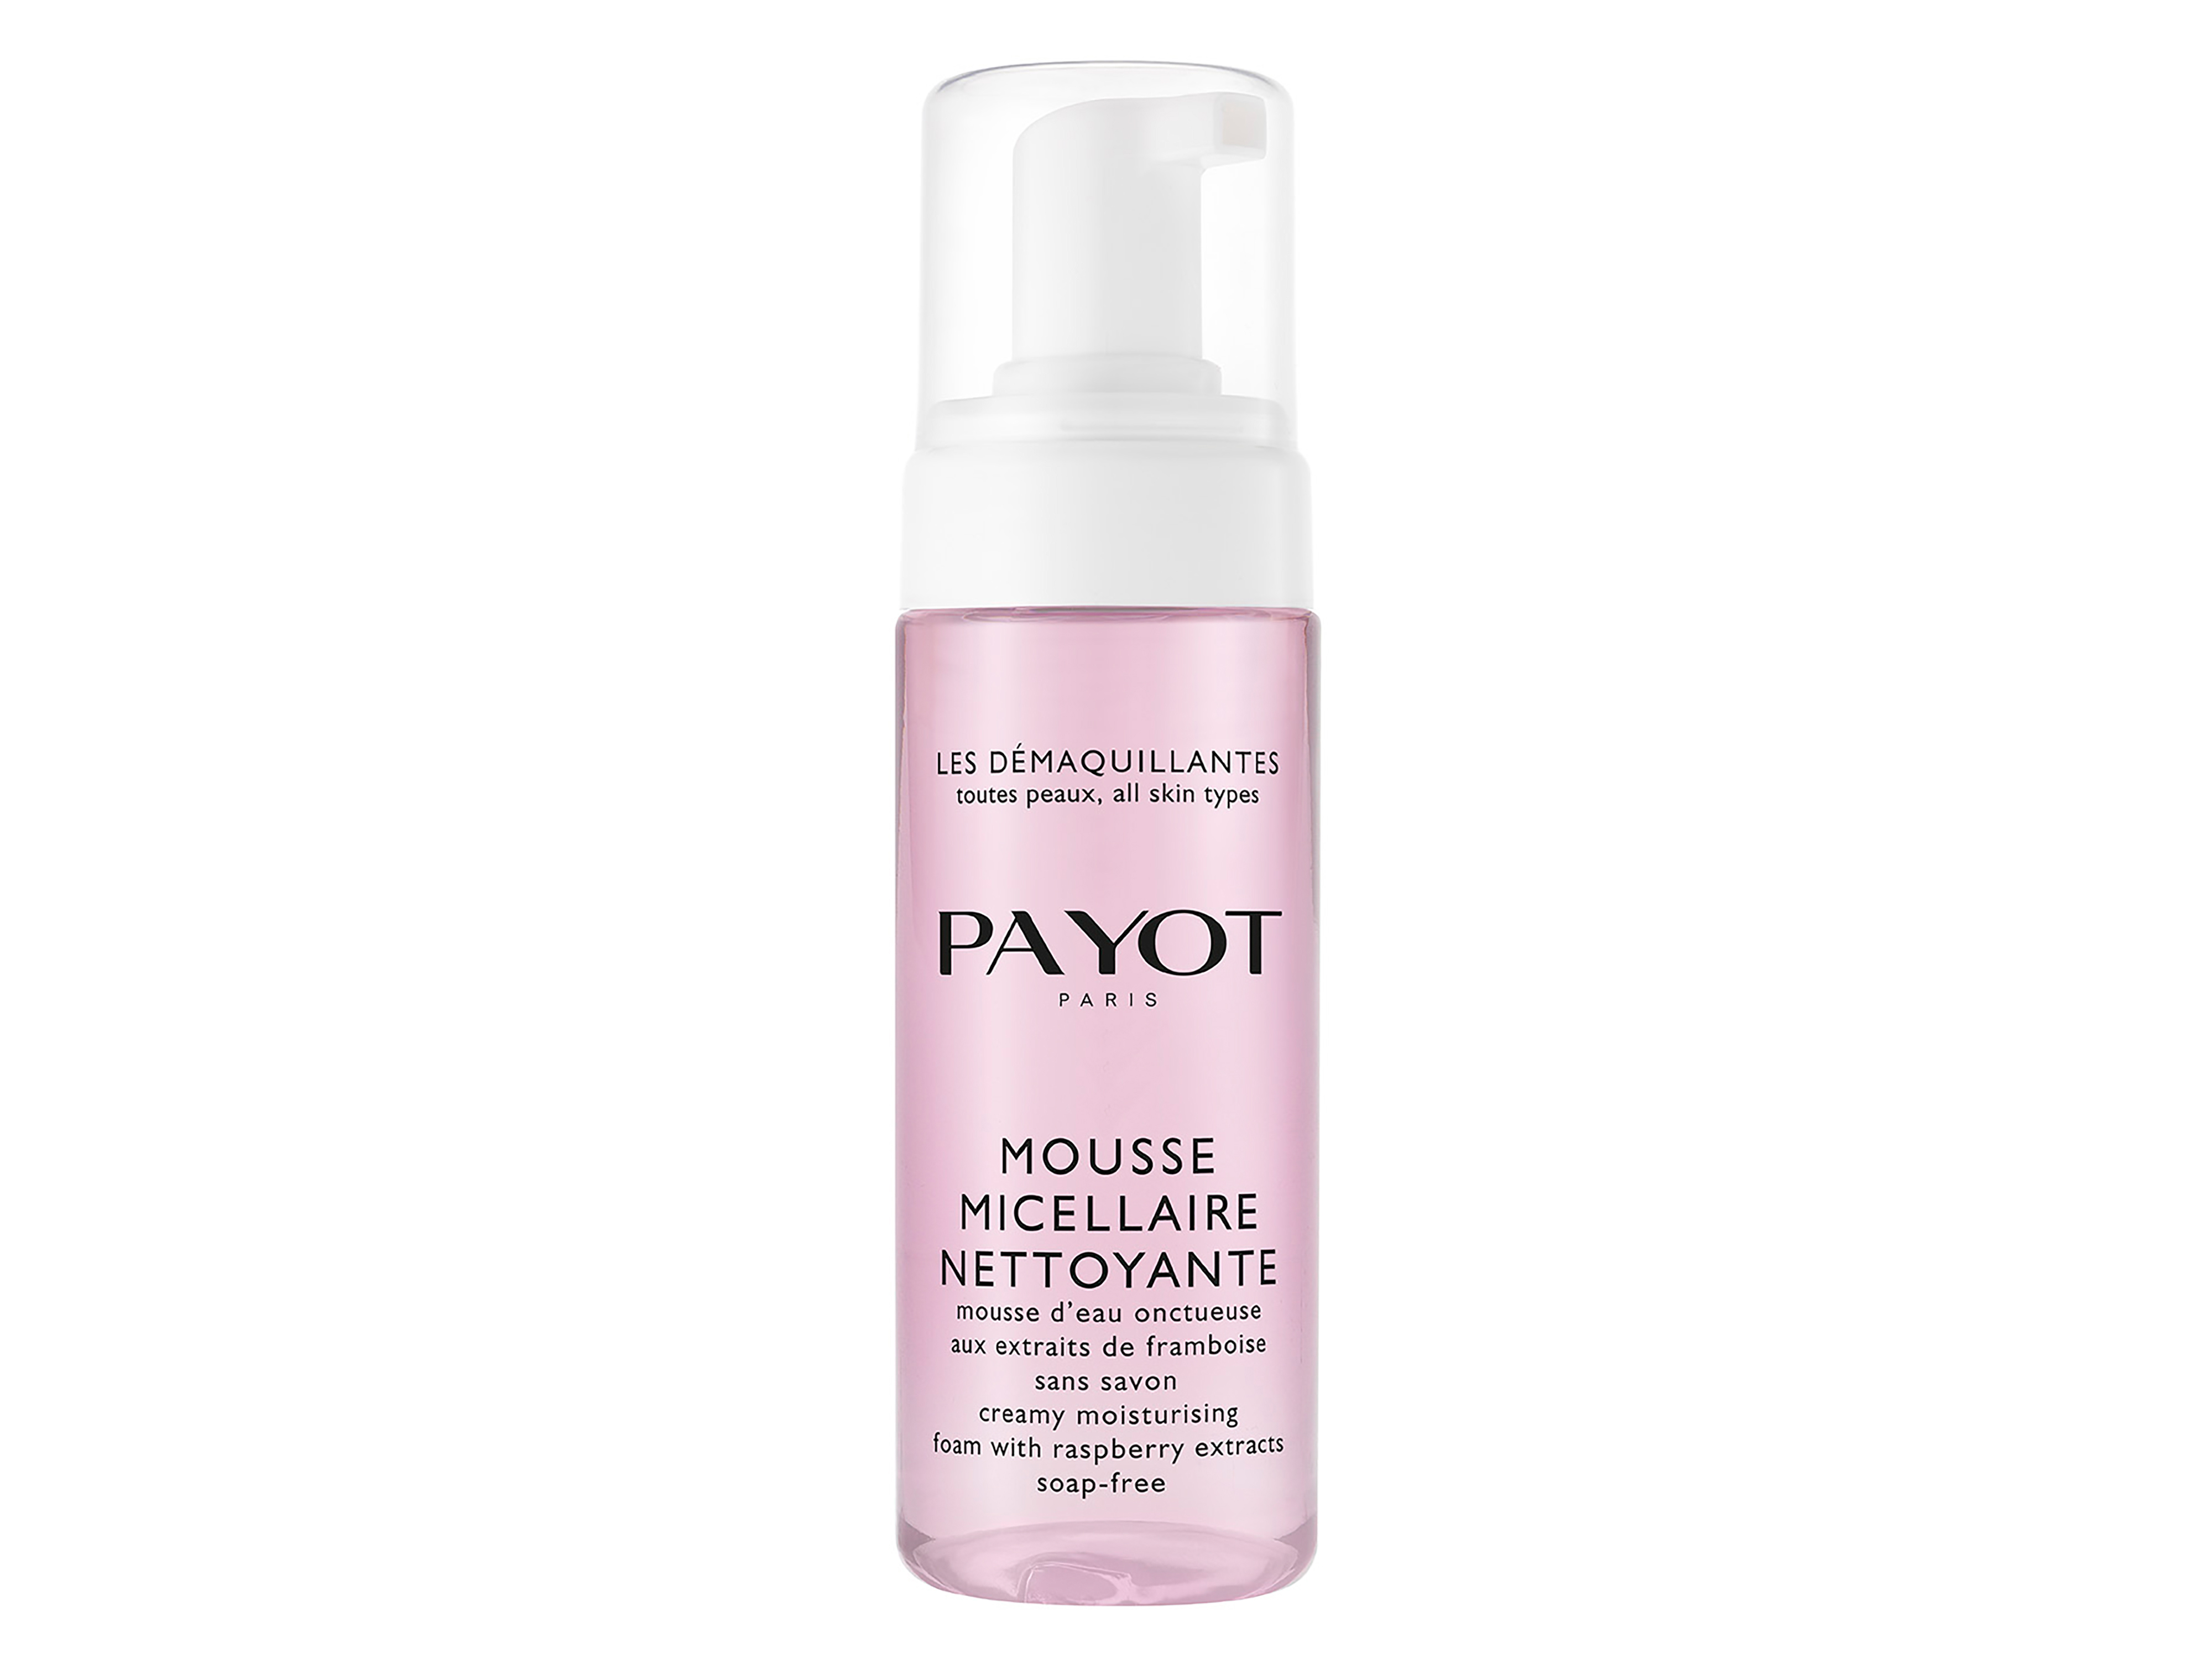 Payot Payot Mousse Micellaire Nettoyante, 150 ml